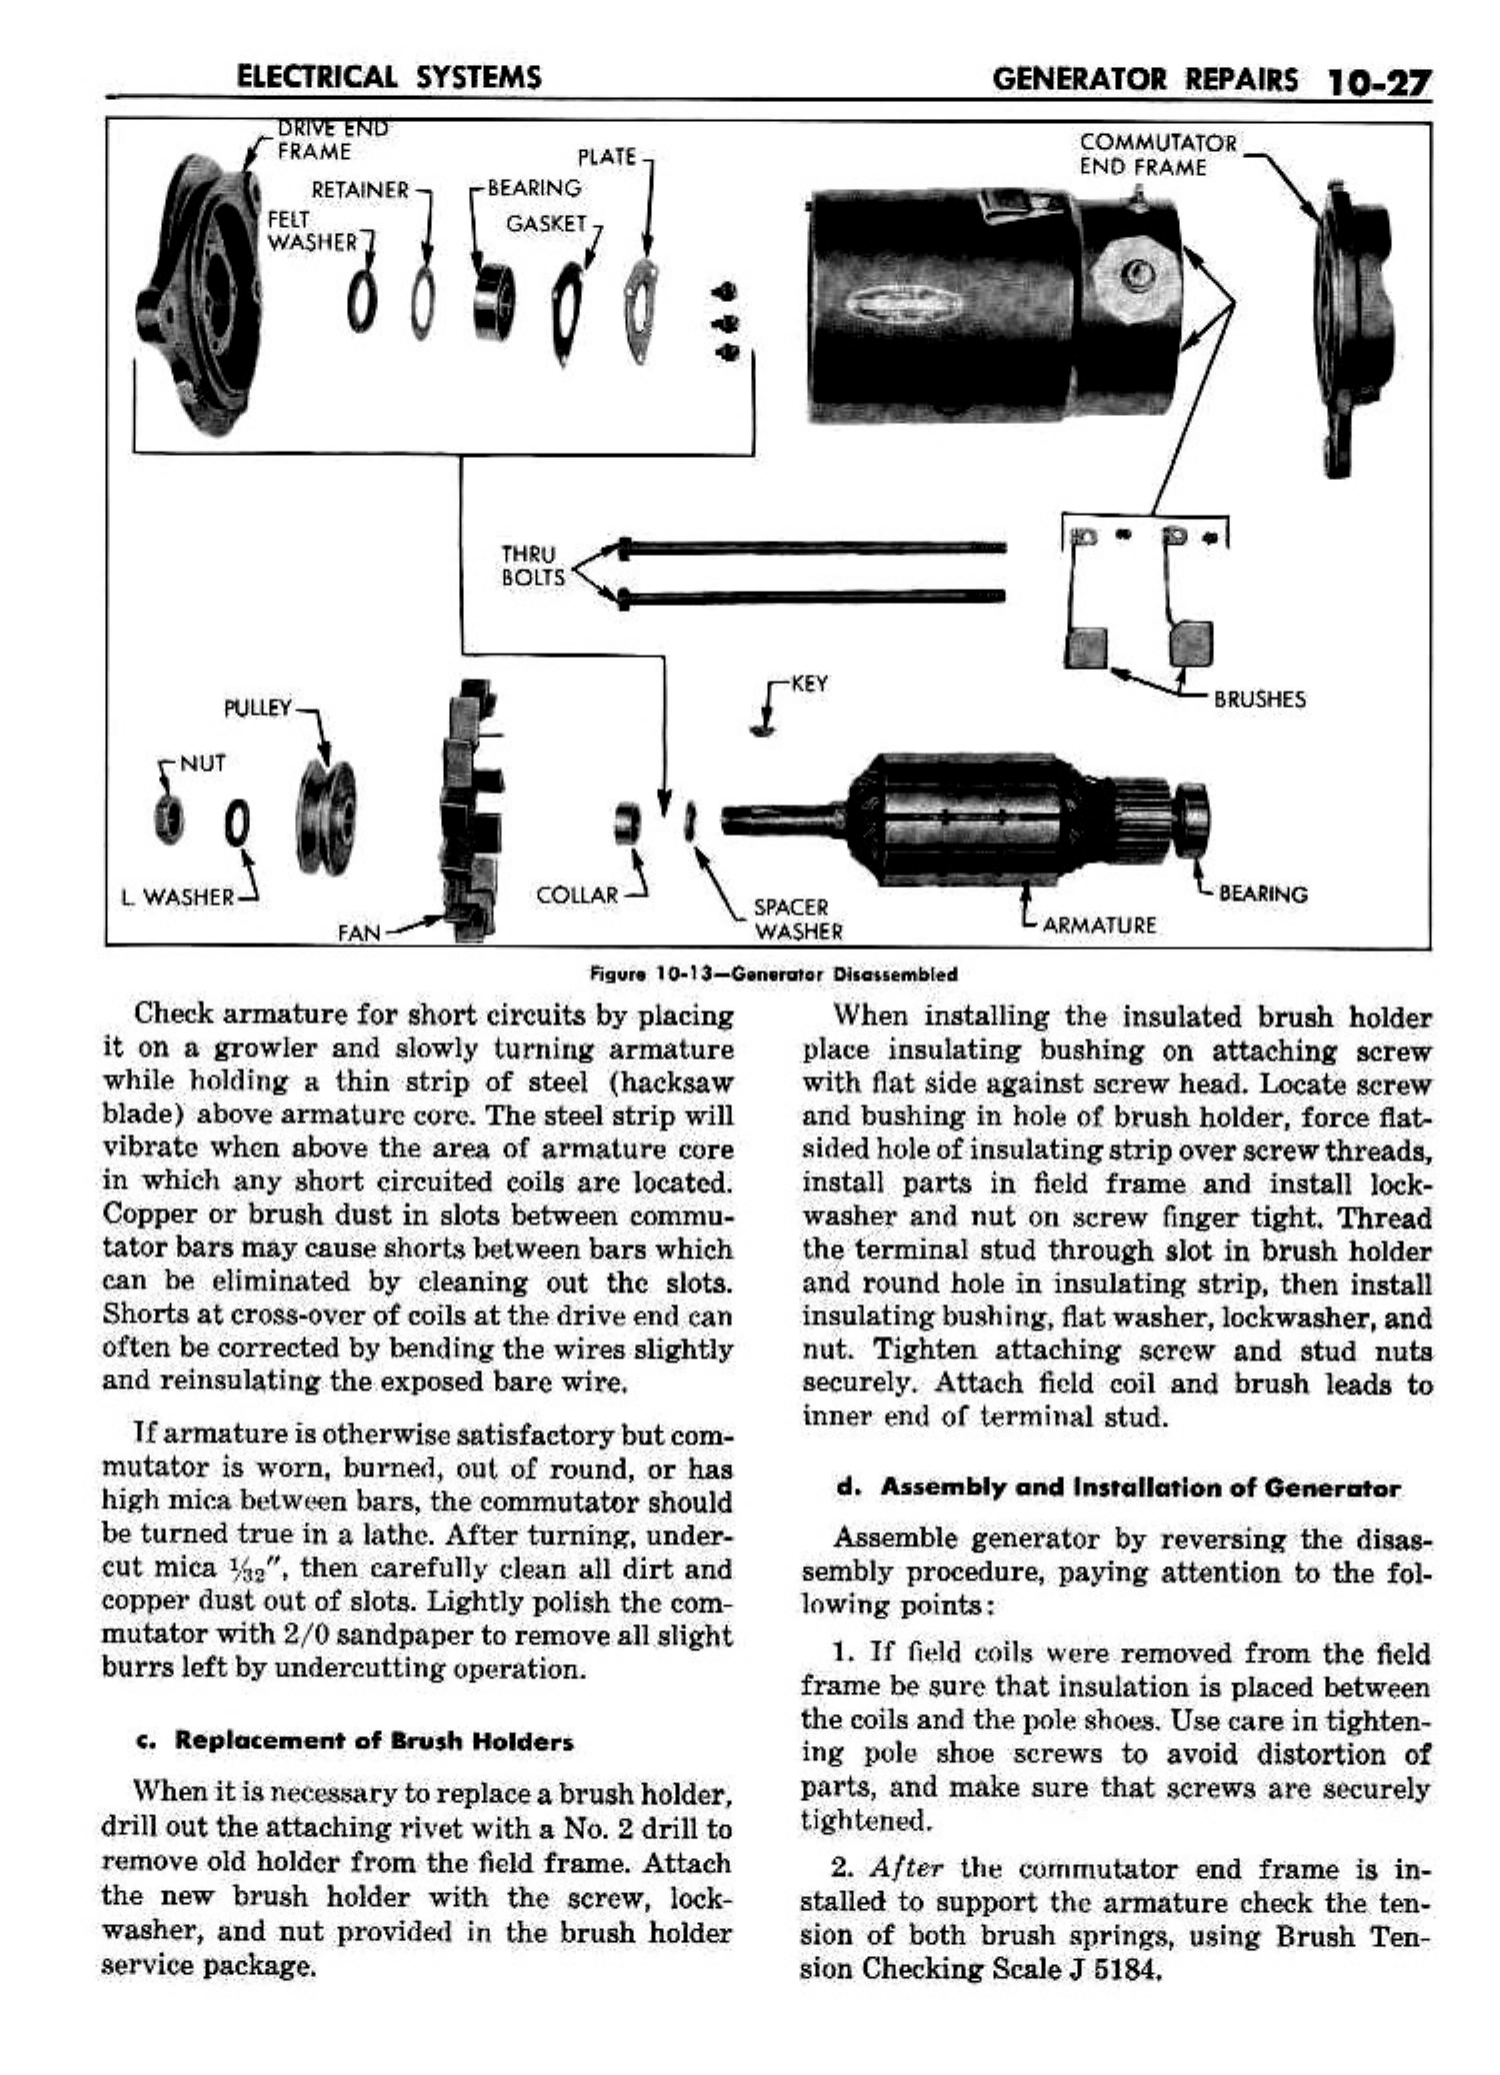 n_11 1958 Buick Shop Manual - Electrical Systems_27.jpg